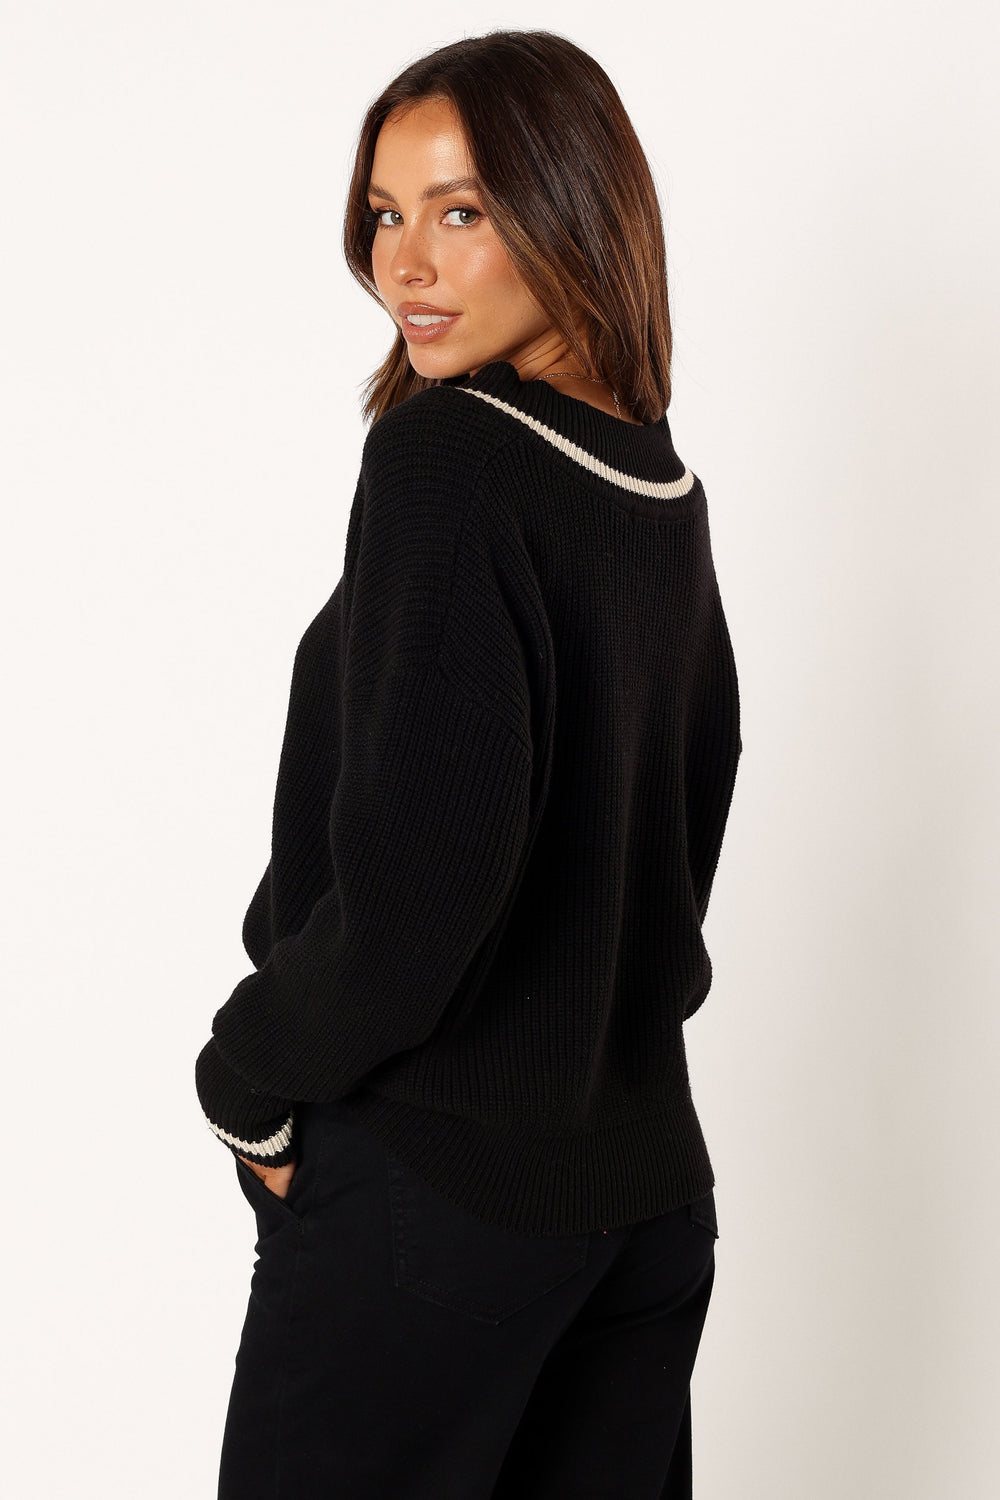 Contrast Elbow Patch Sweater by Victoria Beckham for $115